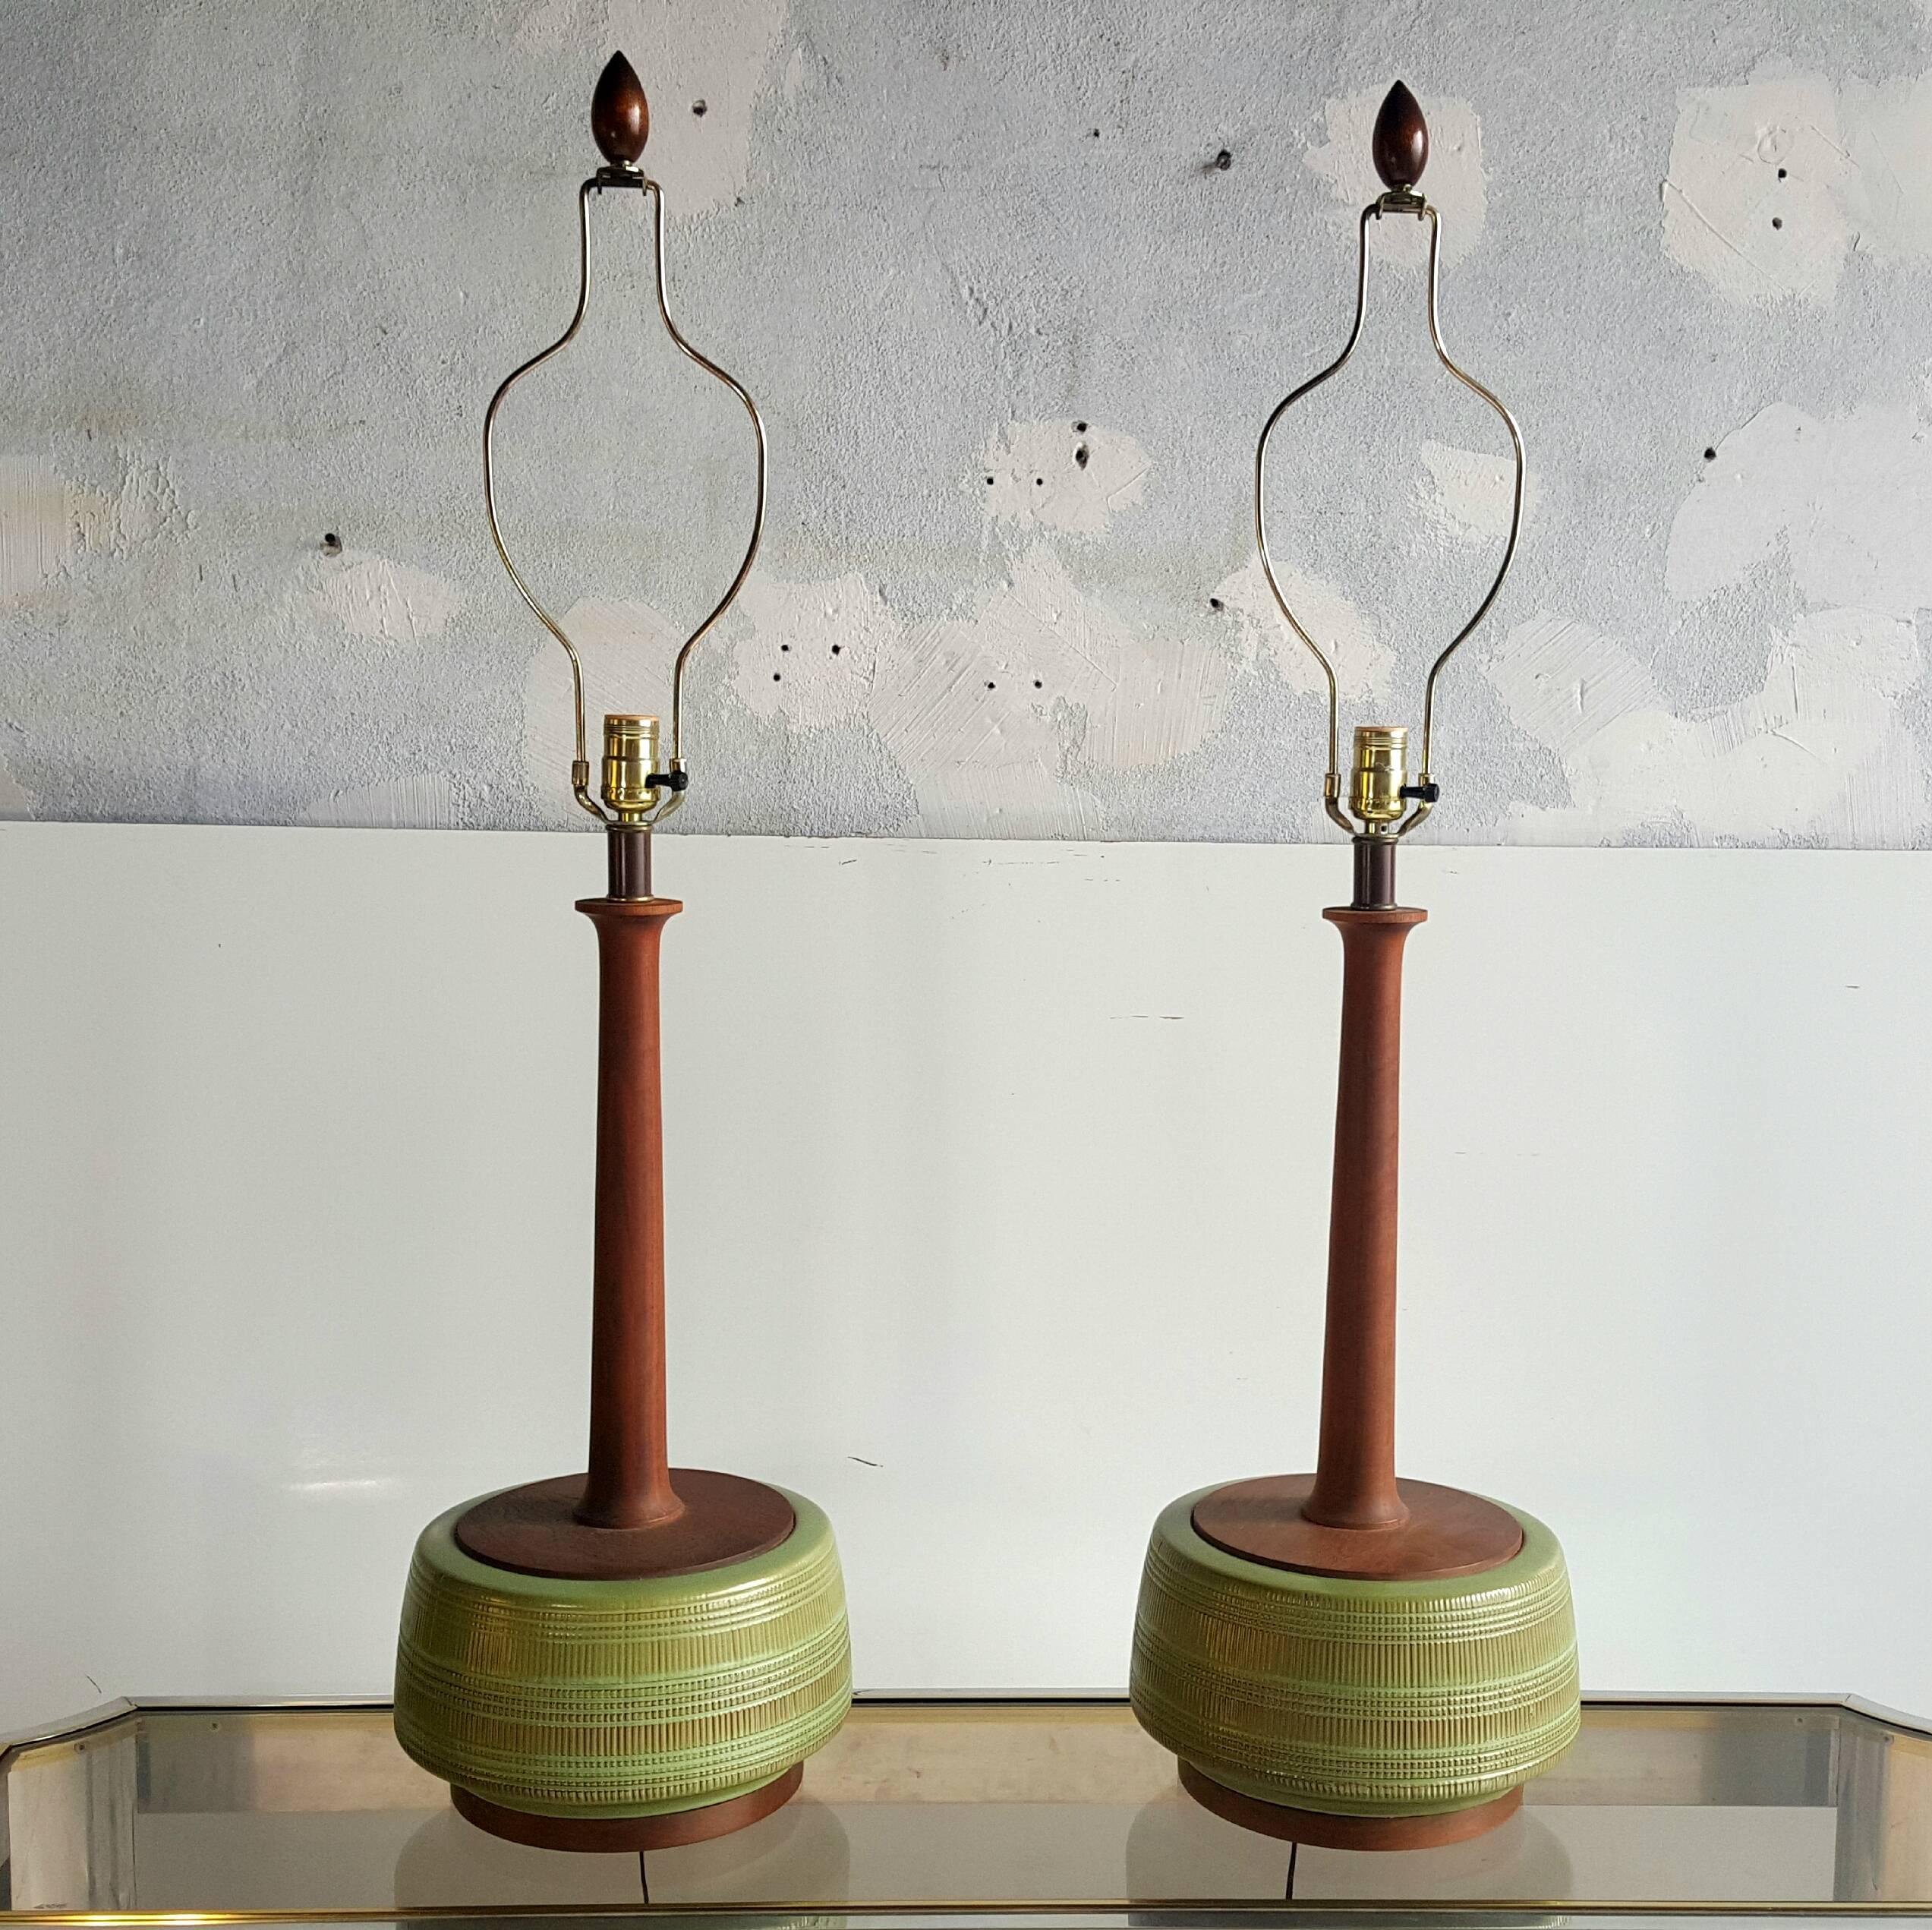 Classic Mid-Century Modern, stunning pair of tables made of decorative glazed pottery with teak wood standards, bases and finials, amazing color and finish, retain original lamp shades in wonderful condition.